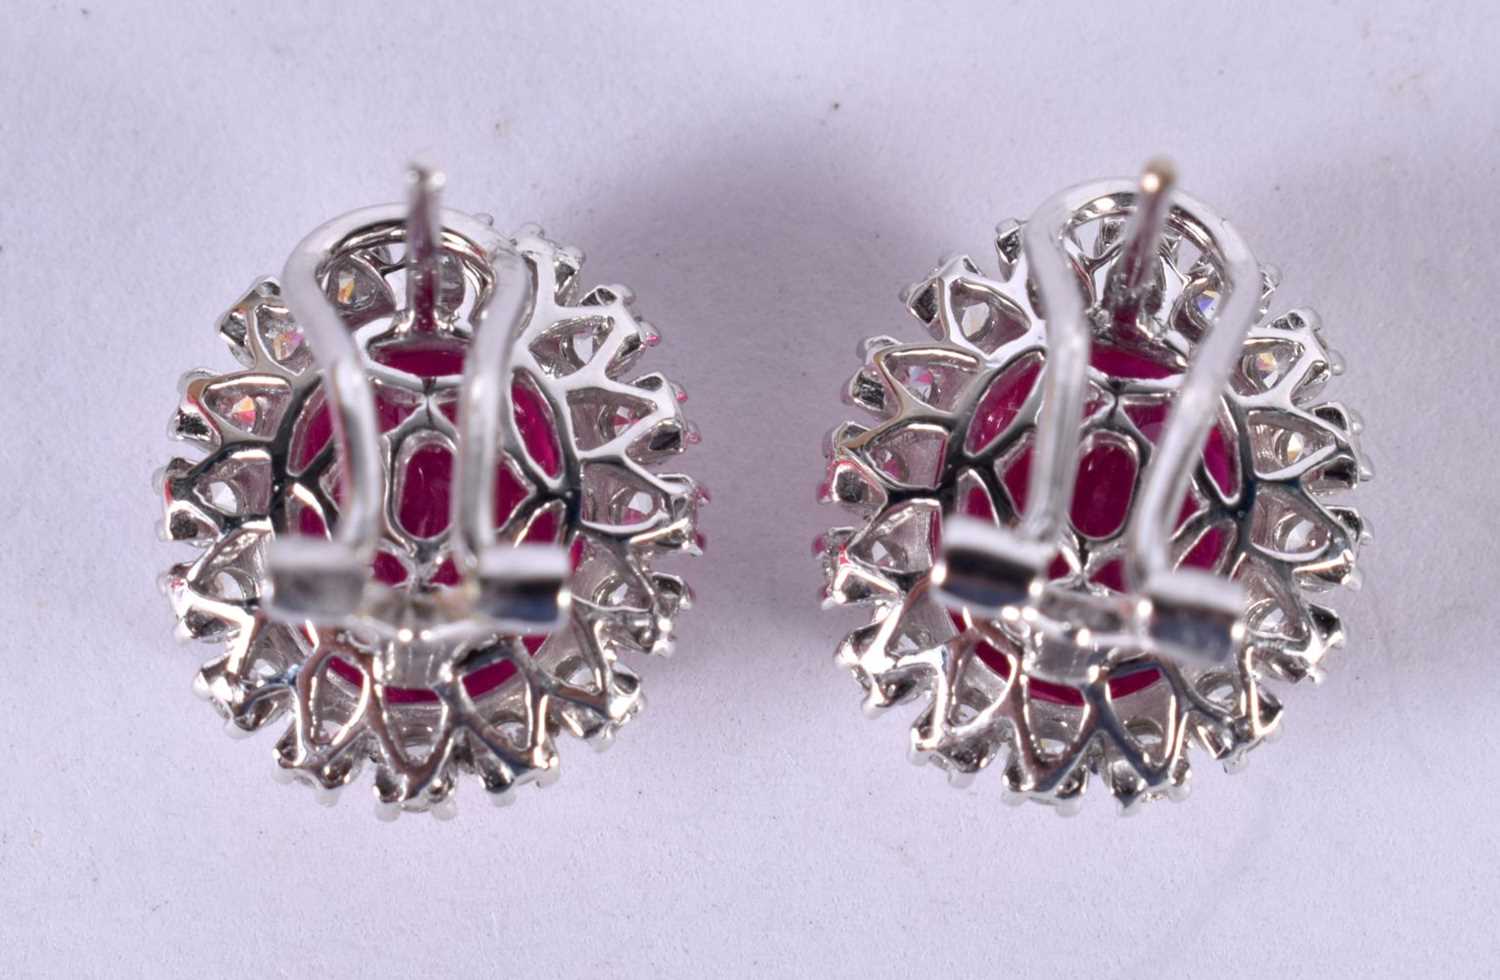 A PAIR OF 14CT WHITE GOLD EARRINGS SET WITH A RUBY SURROUNDED BY A DIAMOND BEZEL. STAMPED 14k 585, - Image 2 of 3